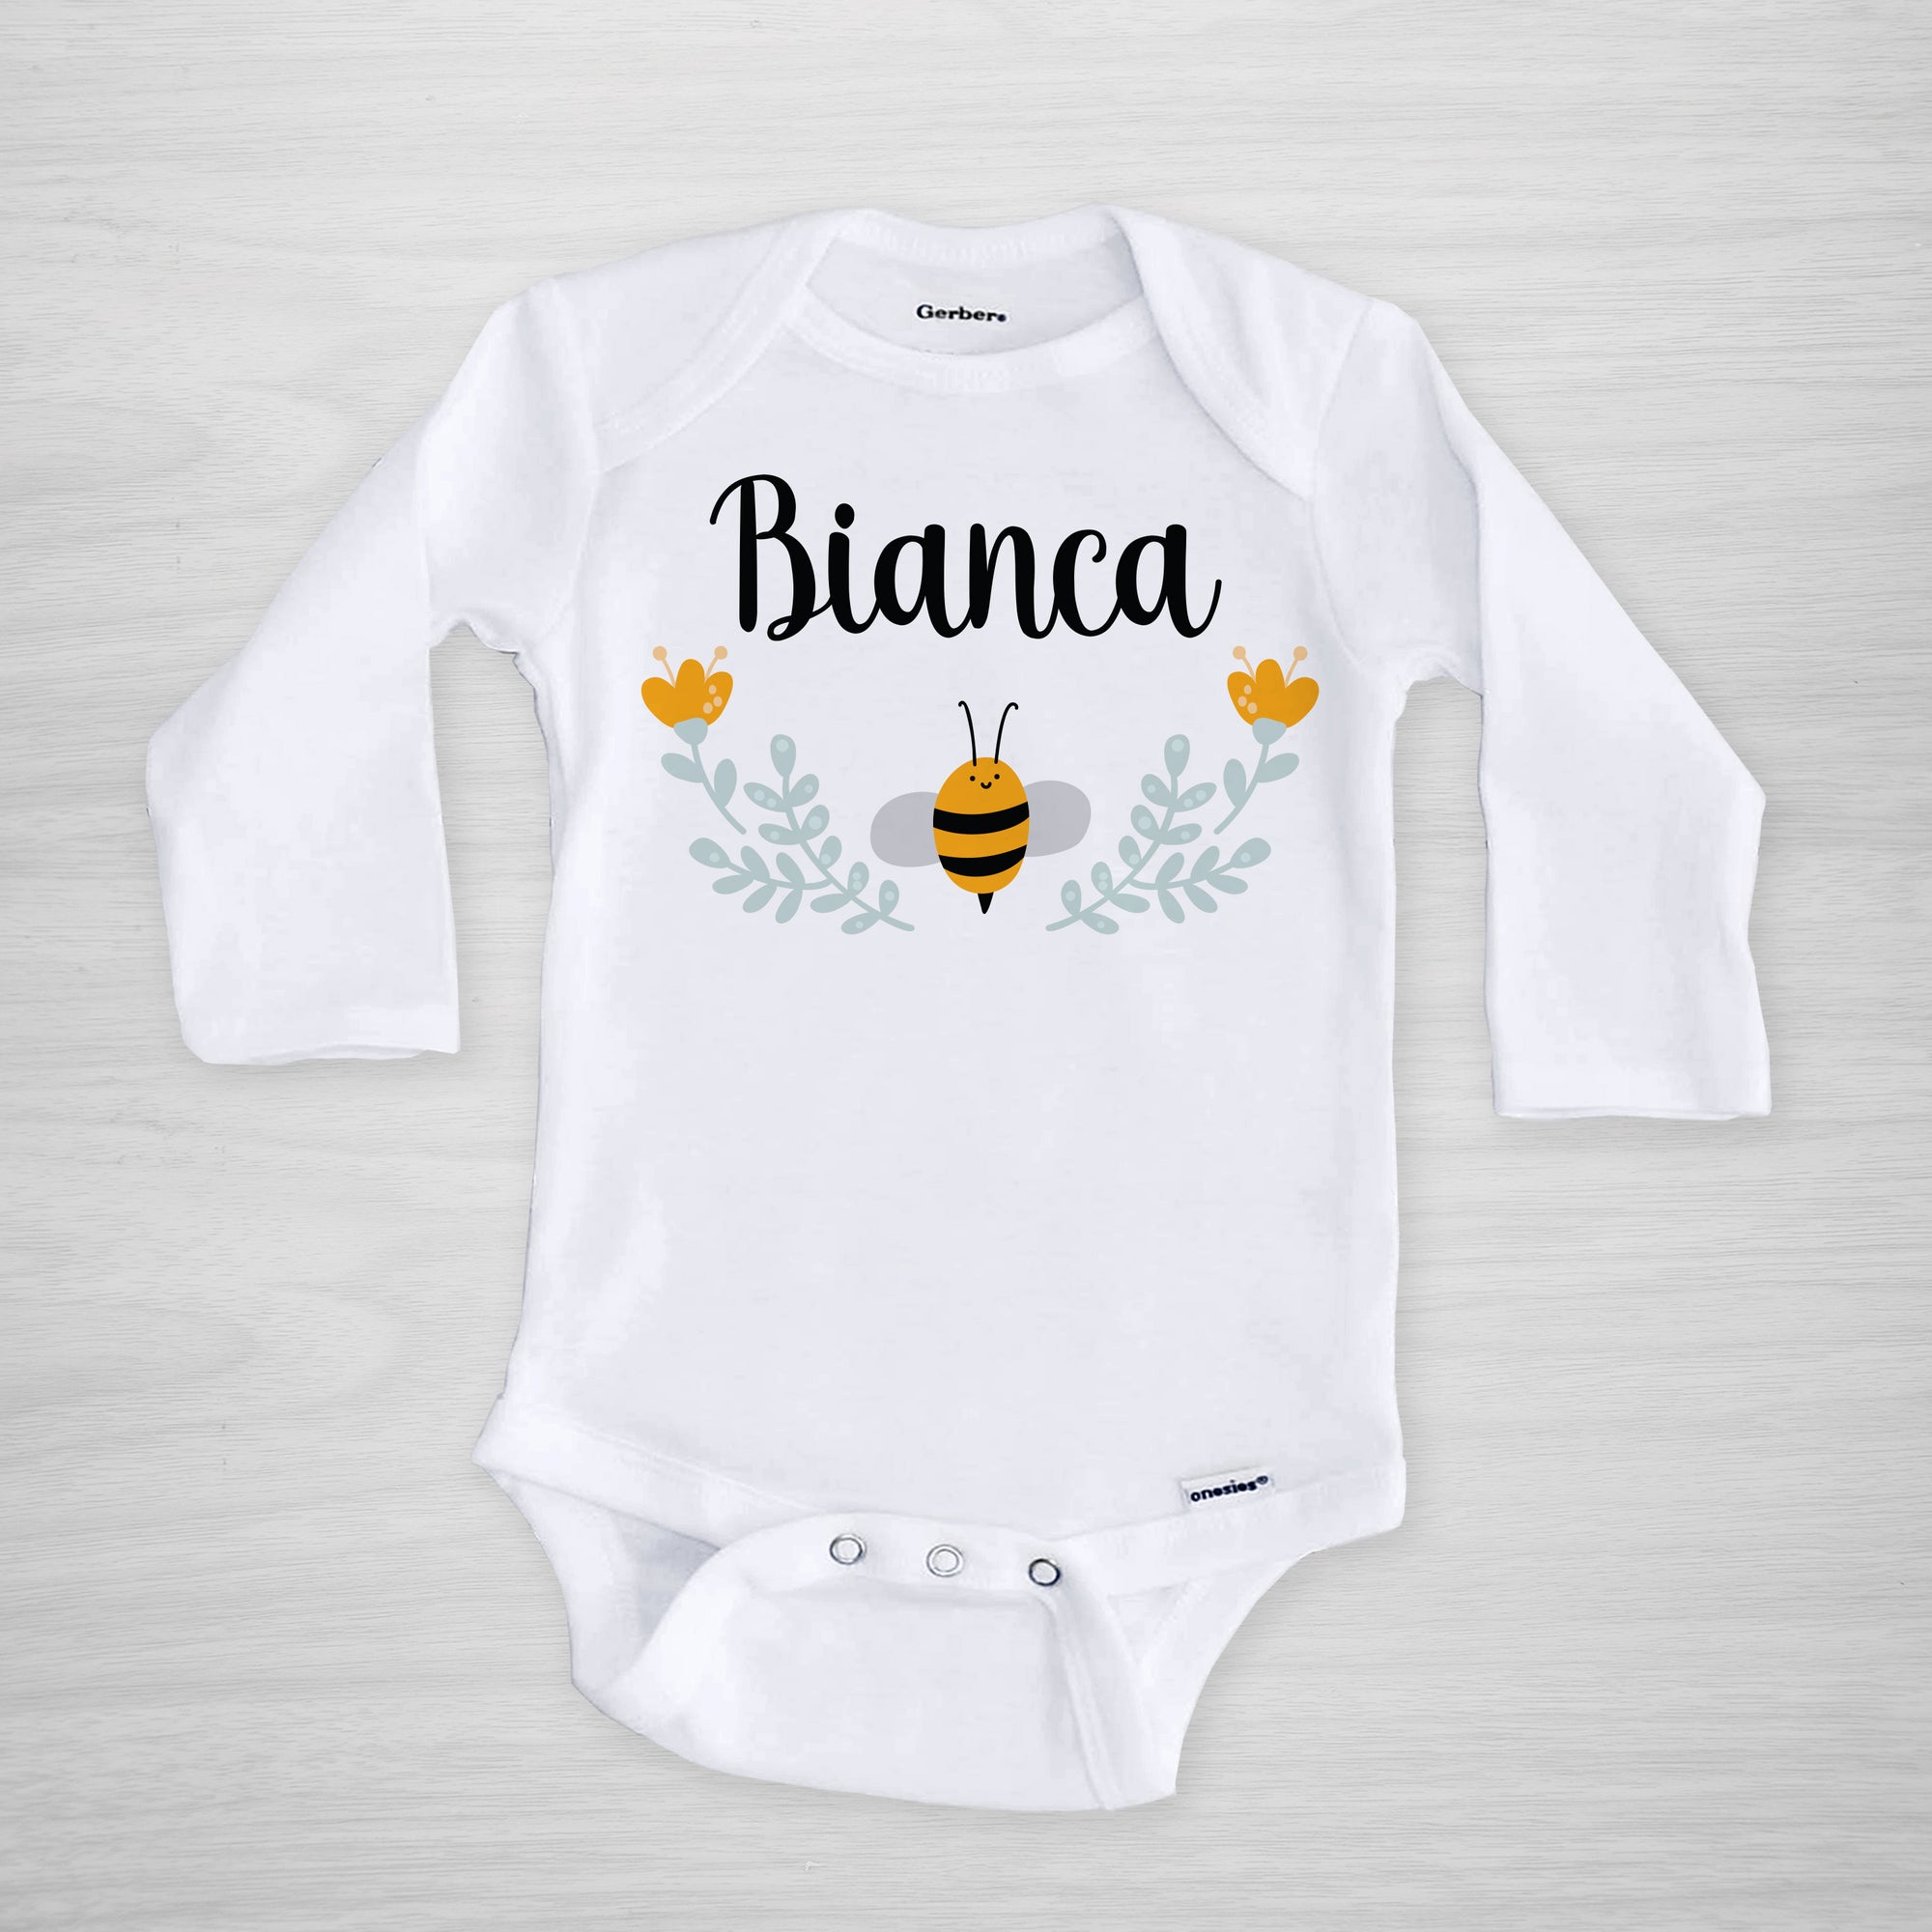 Bee Personalized onesie, featuring a sweet little bumblebee and a floral frame, genuine Gerber Onesies®, long sleeved